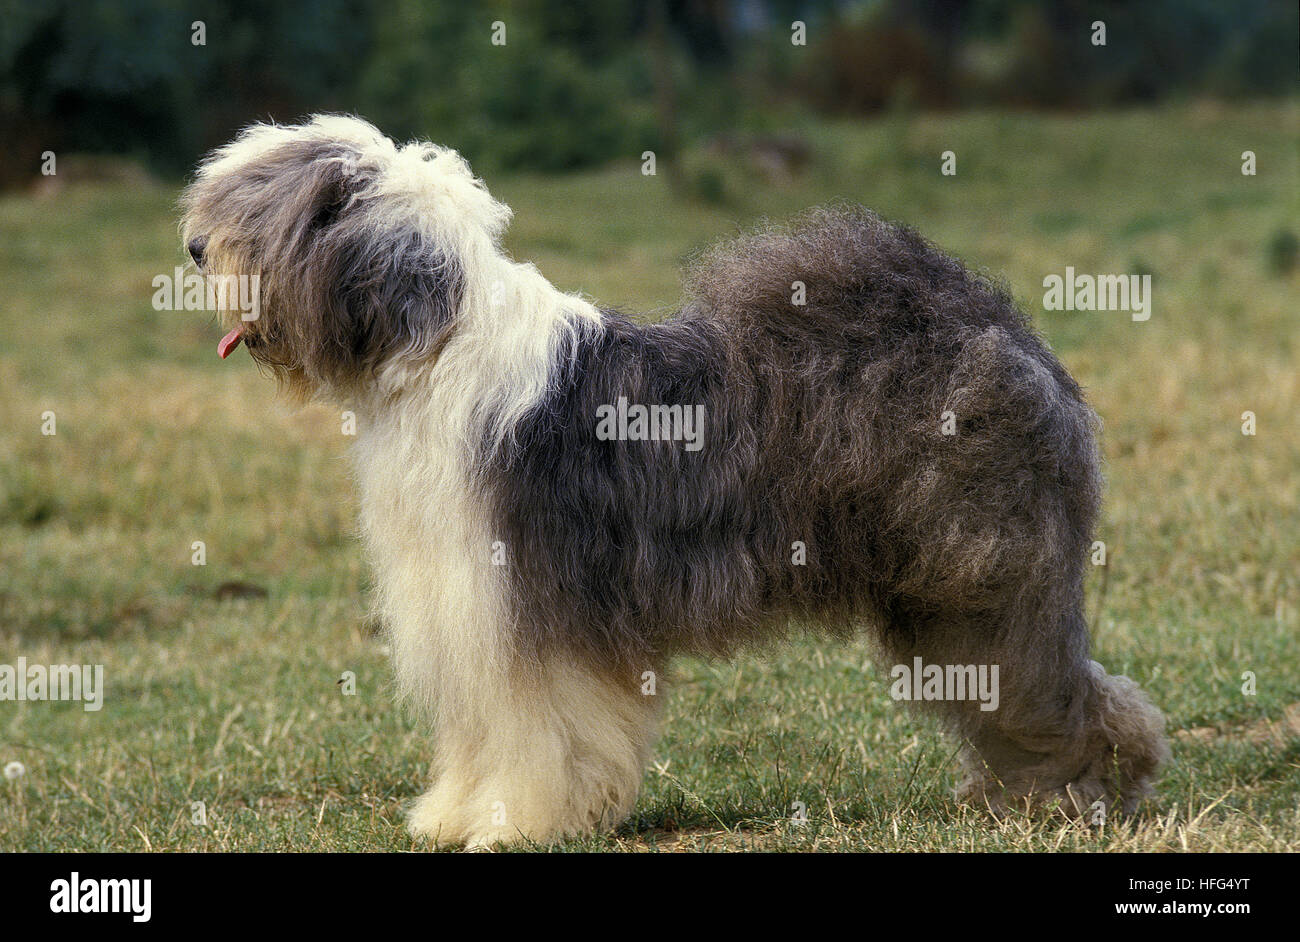 530+ Old English Sheepdog Puppy Pictures Stock Photos, Pictures